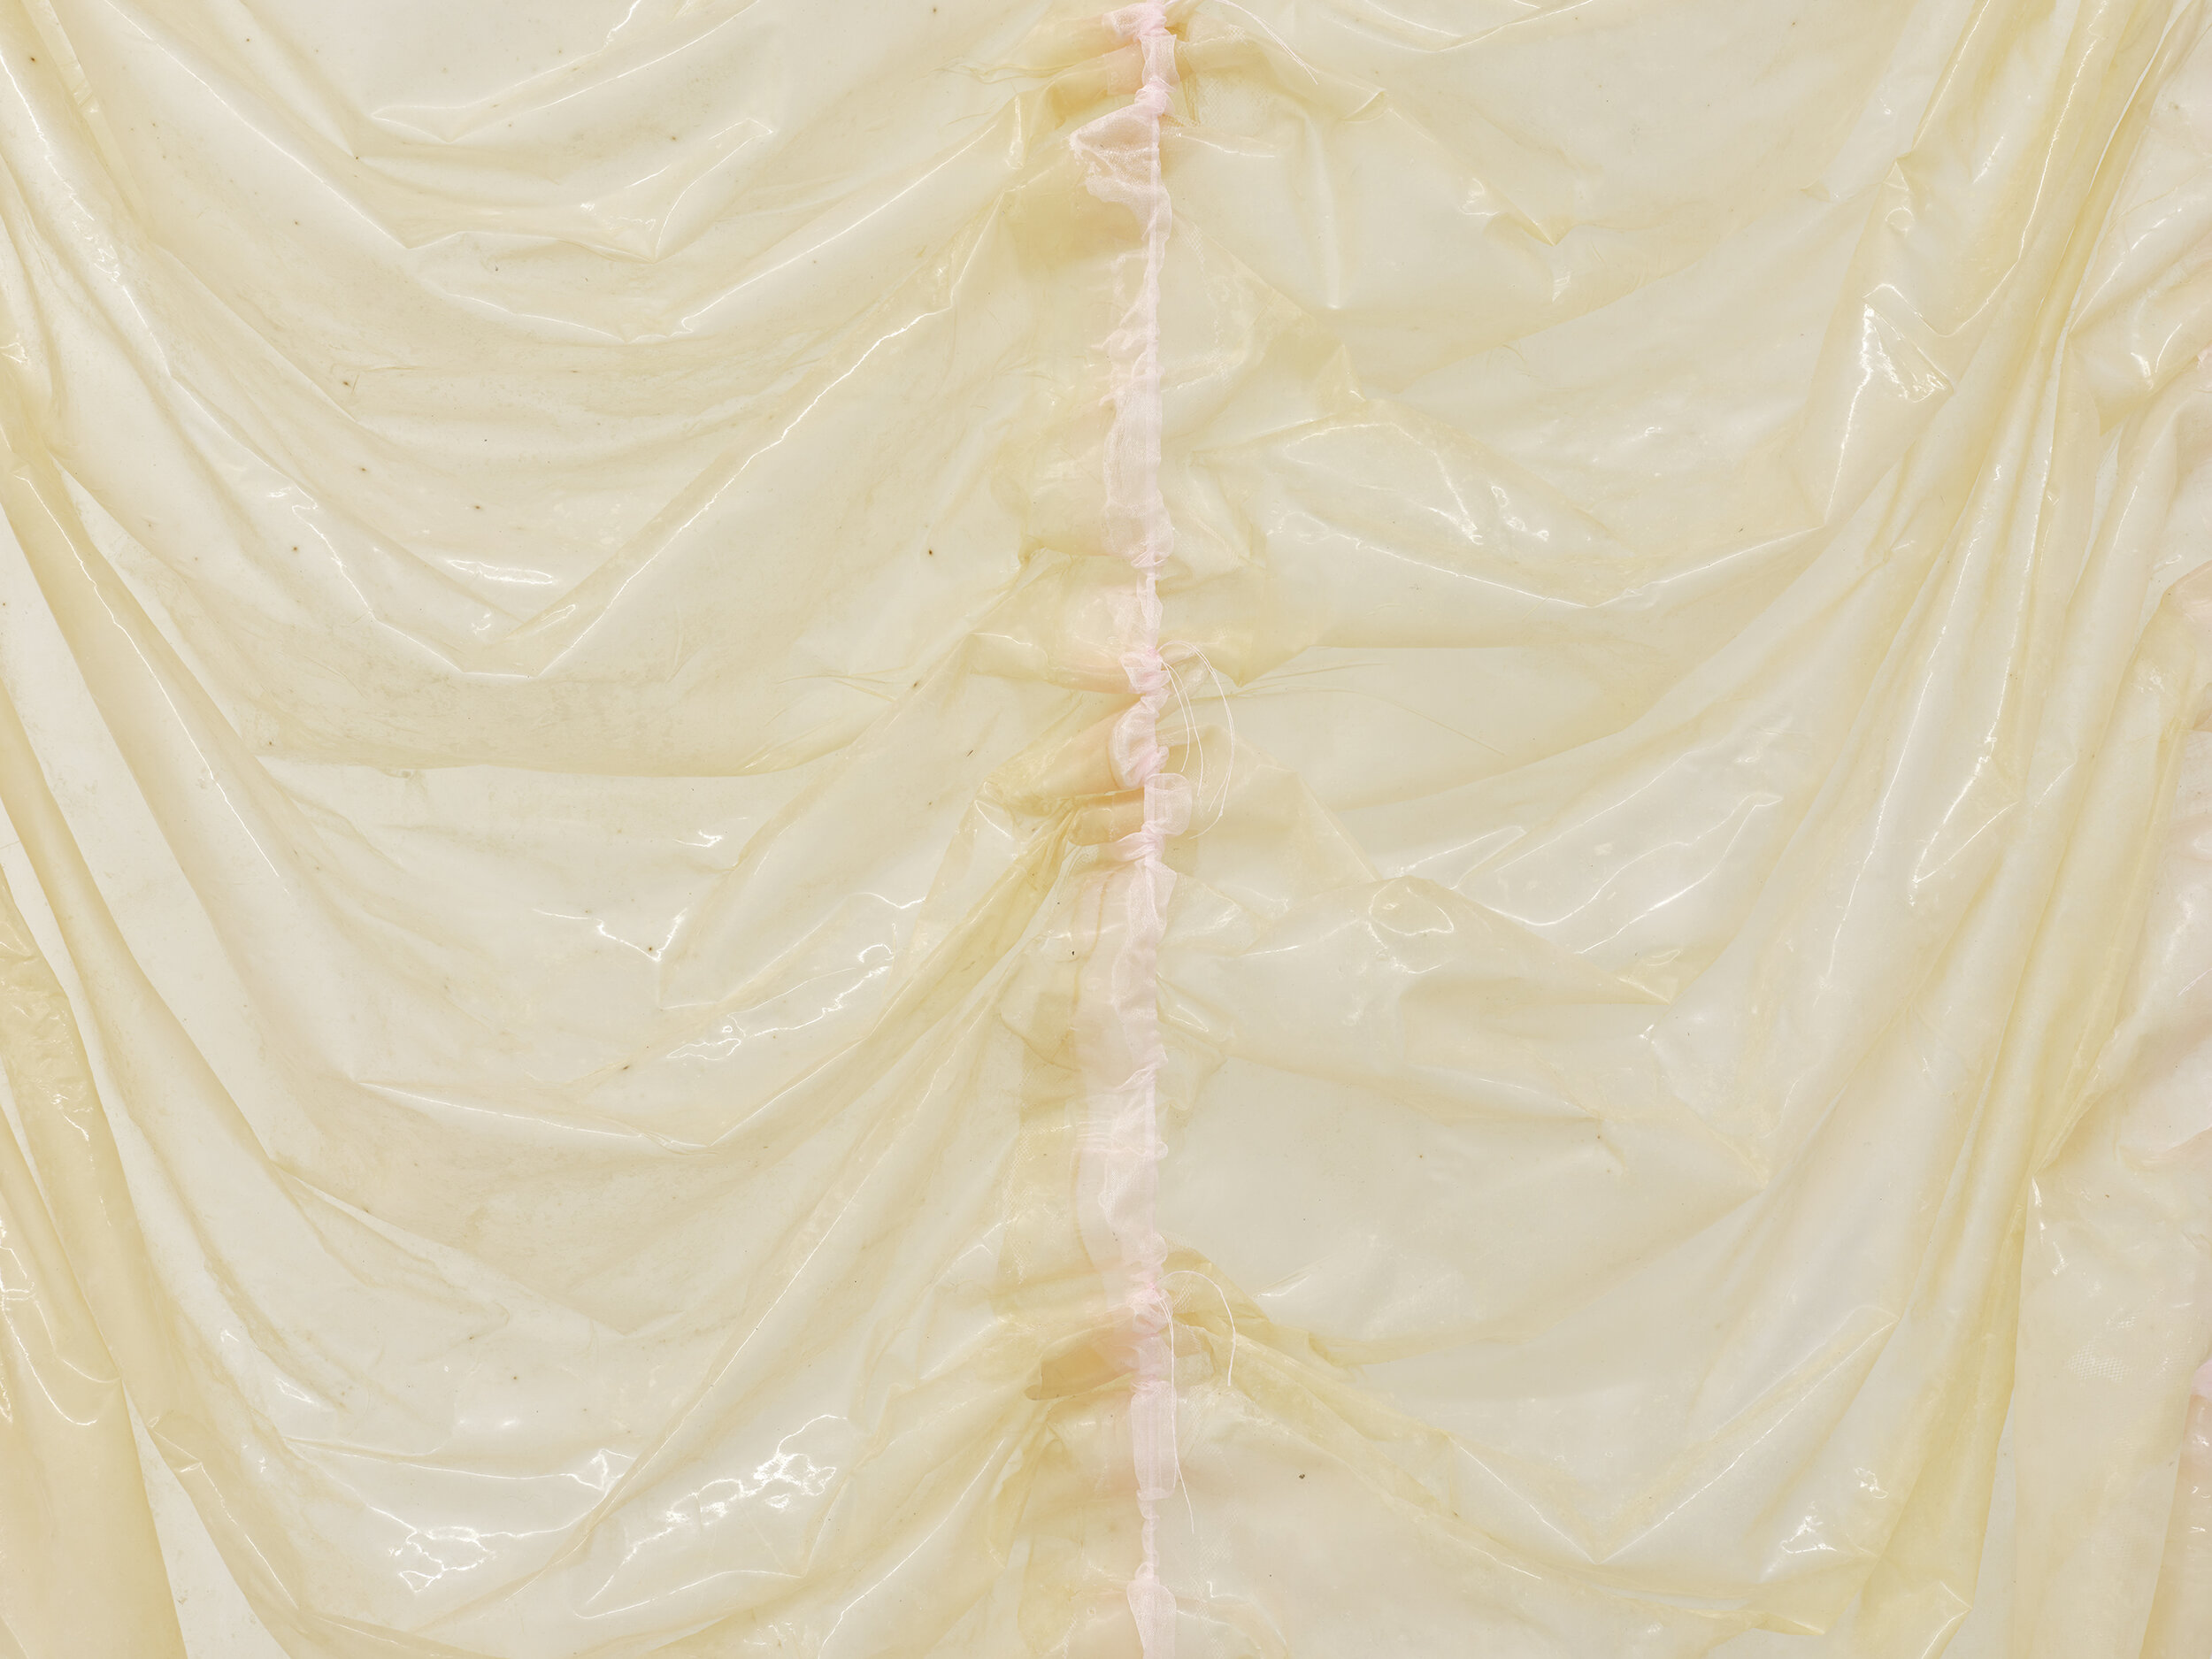  Karinne Smith  Untitled (piece of Pinkie II) , 2021 (detail) collagen dyed with soda, silicone, baby powder, ribbon,  scrotum clamps, cotton rope, cast plaster melons 124 x 52 x 36 inches (310 x 132 x 91 cm) (KS1) 